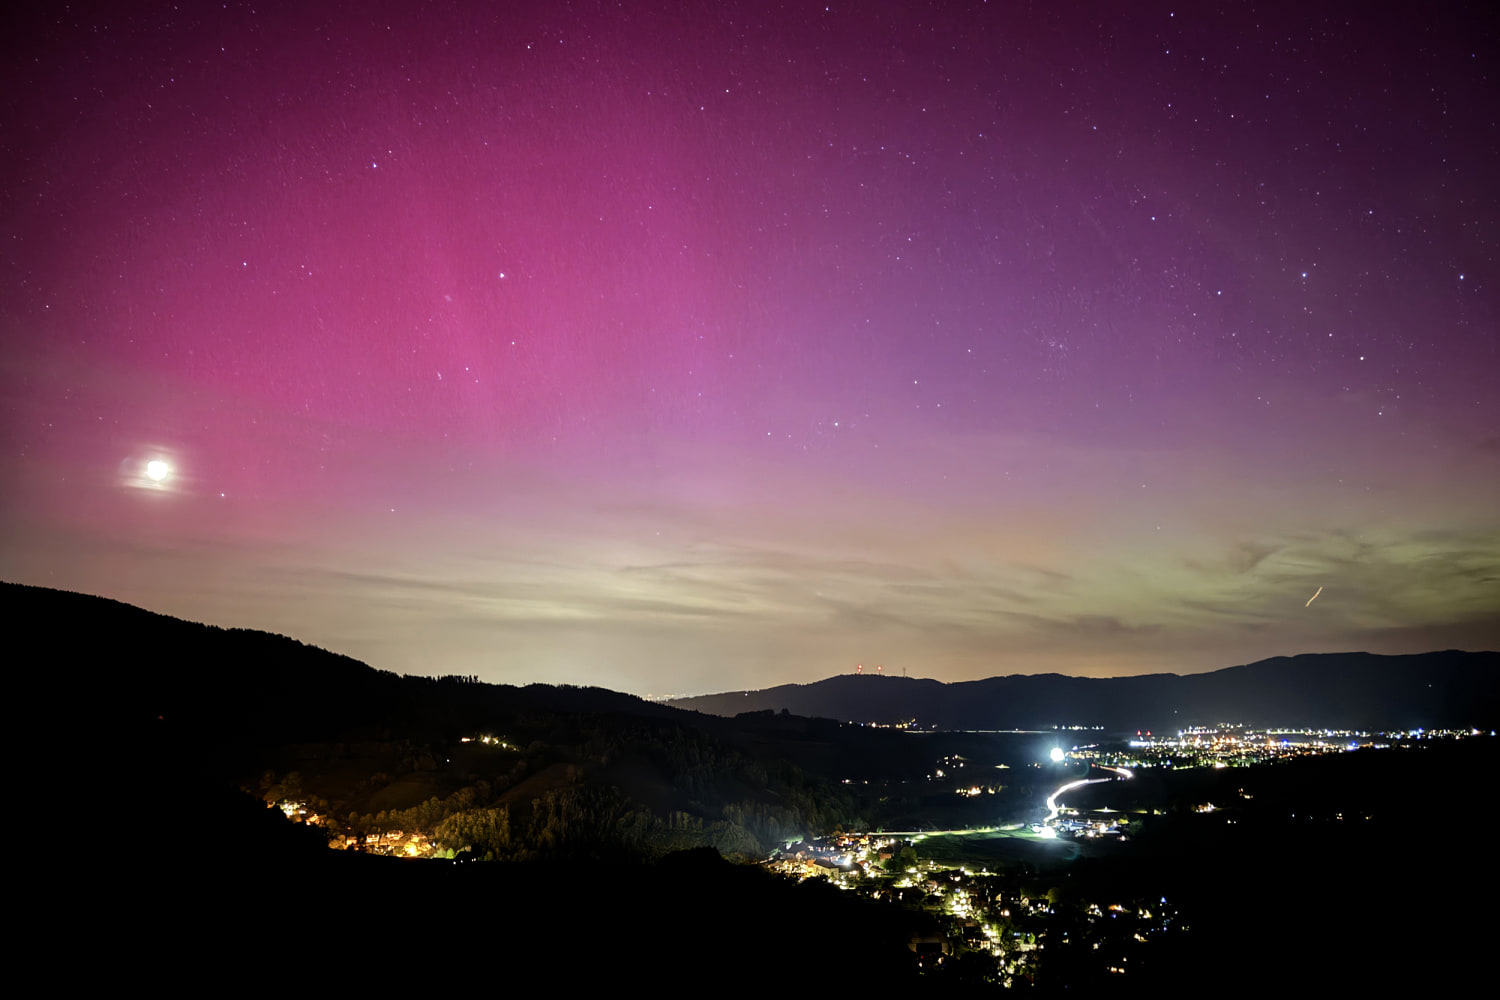 Severe solar storm expected to supercharge northern lights across the U.S.